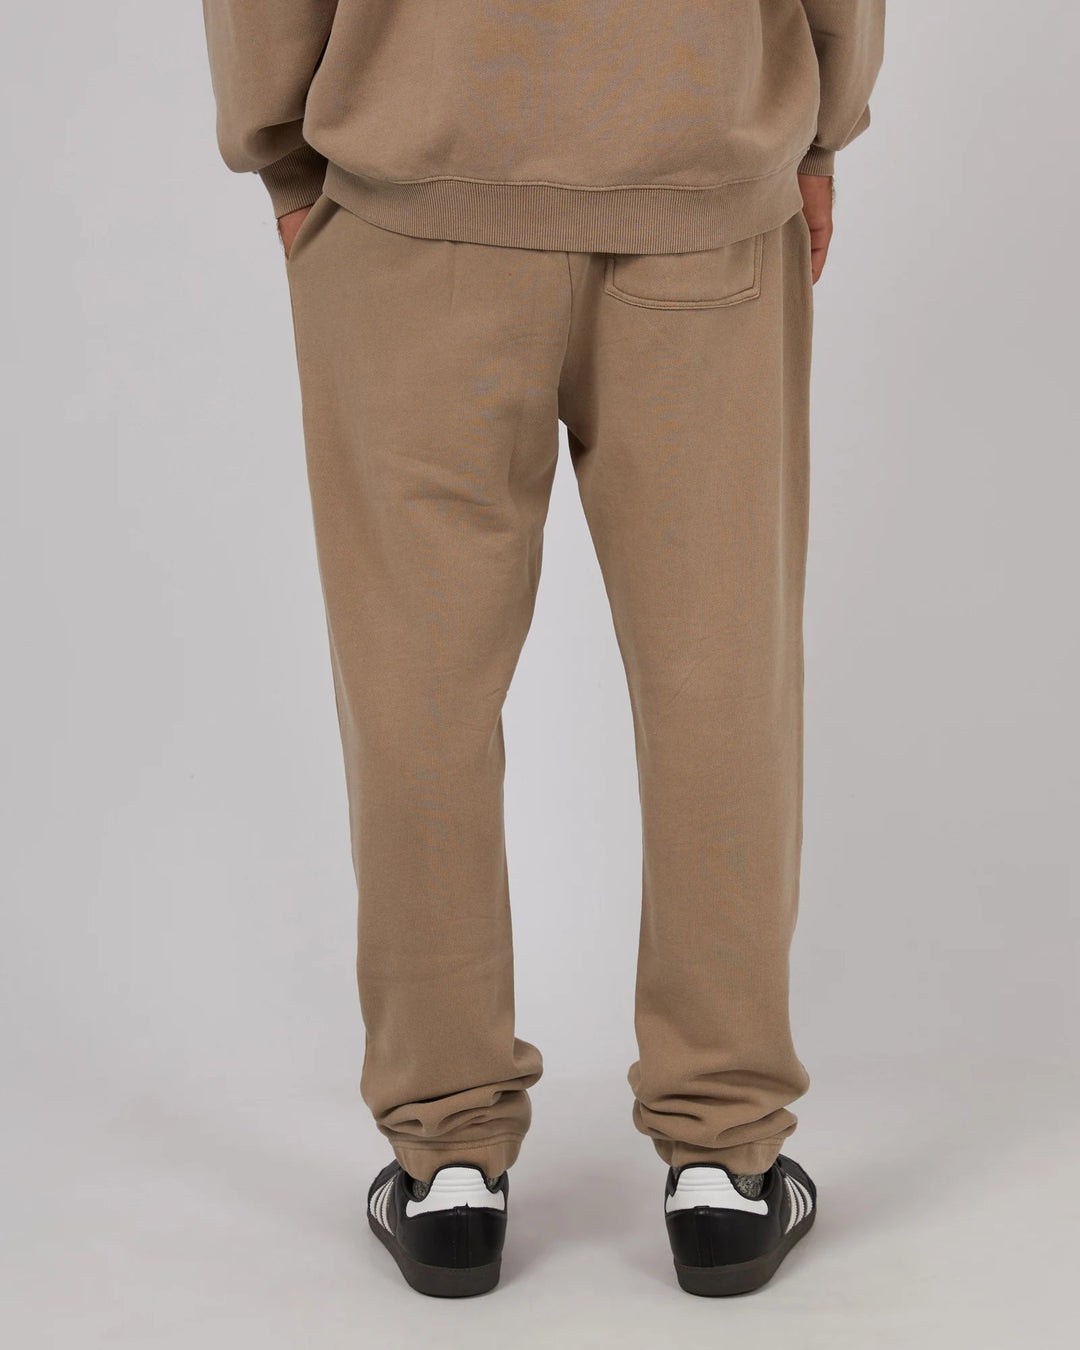 Essential Theory Track Pant - Tan - Chillis & More NZ